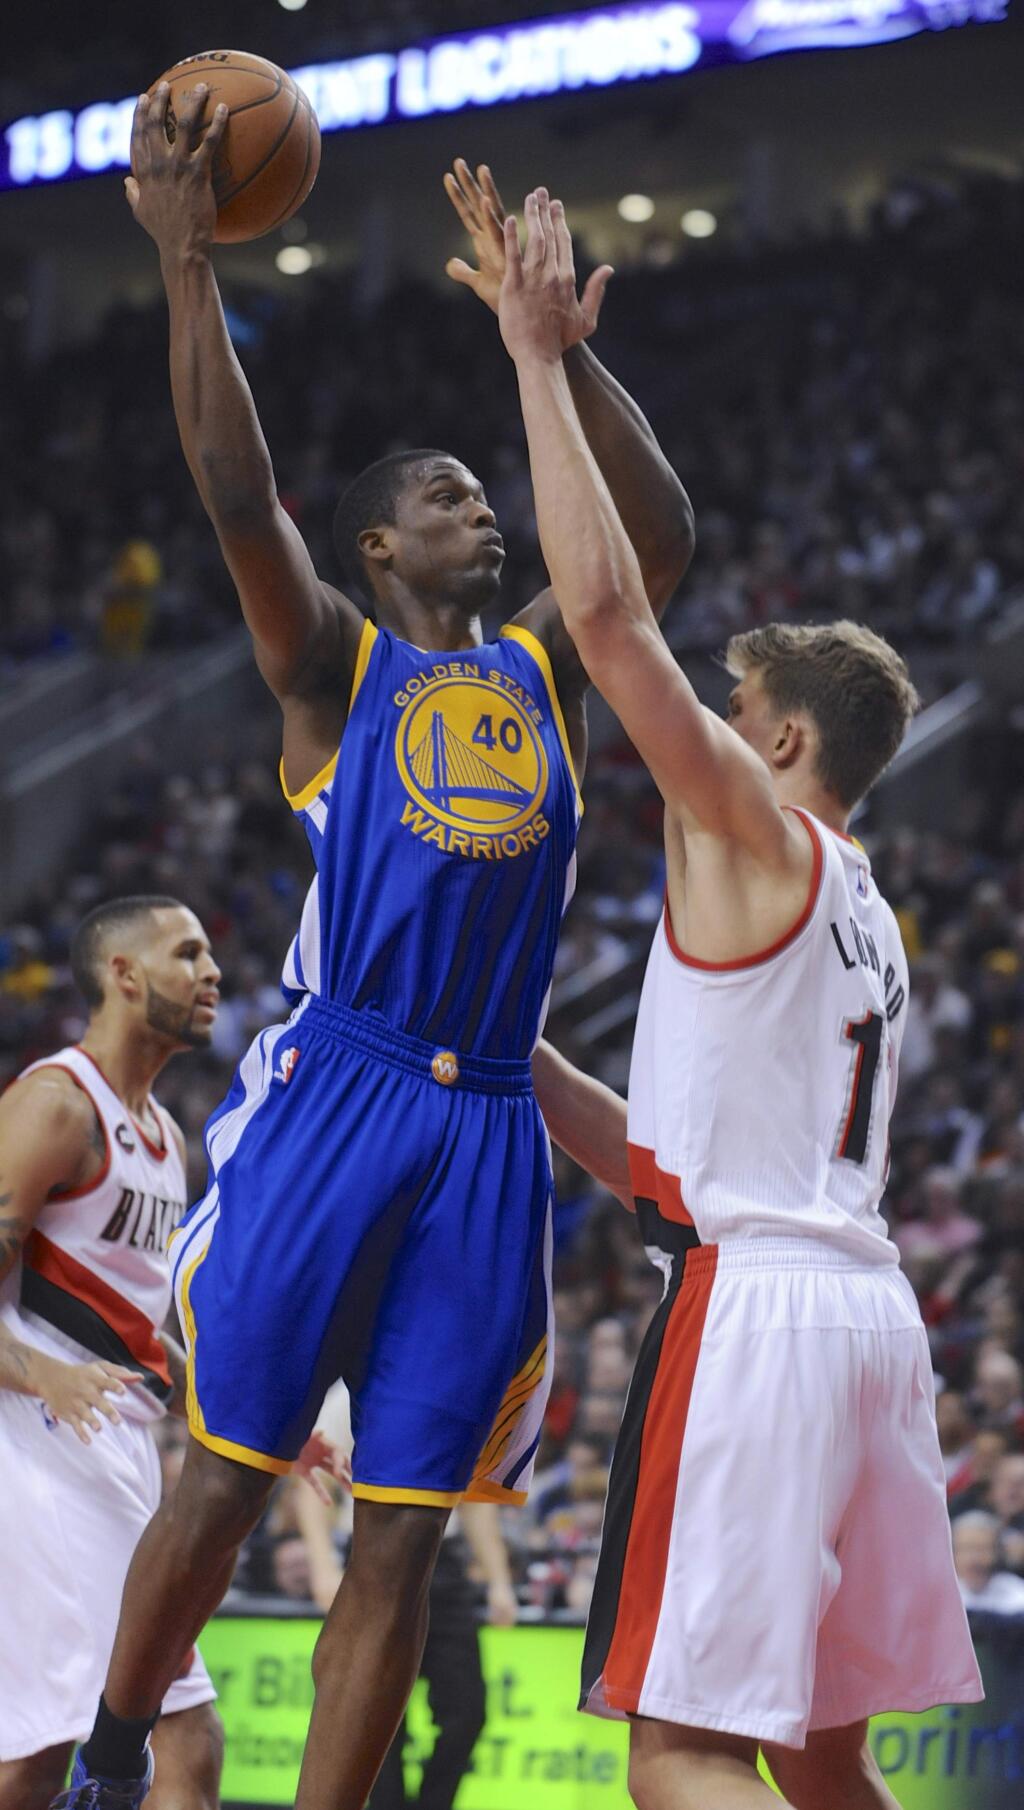 Golden State Warriors' Harrison Barnes (40) shoots against Portland Trail Blazers' Meyers Leonard (11) during the first half of an NBA basketball game in Portland, Ore., Tuesday, March 24, 2015. (AP Photo/Greg Wahl-Stephens)